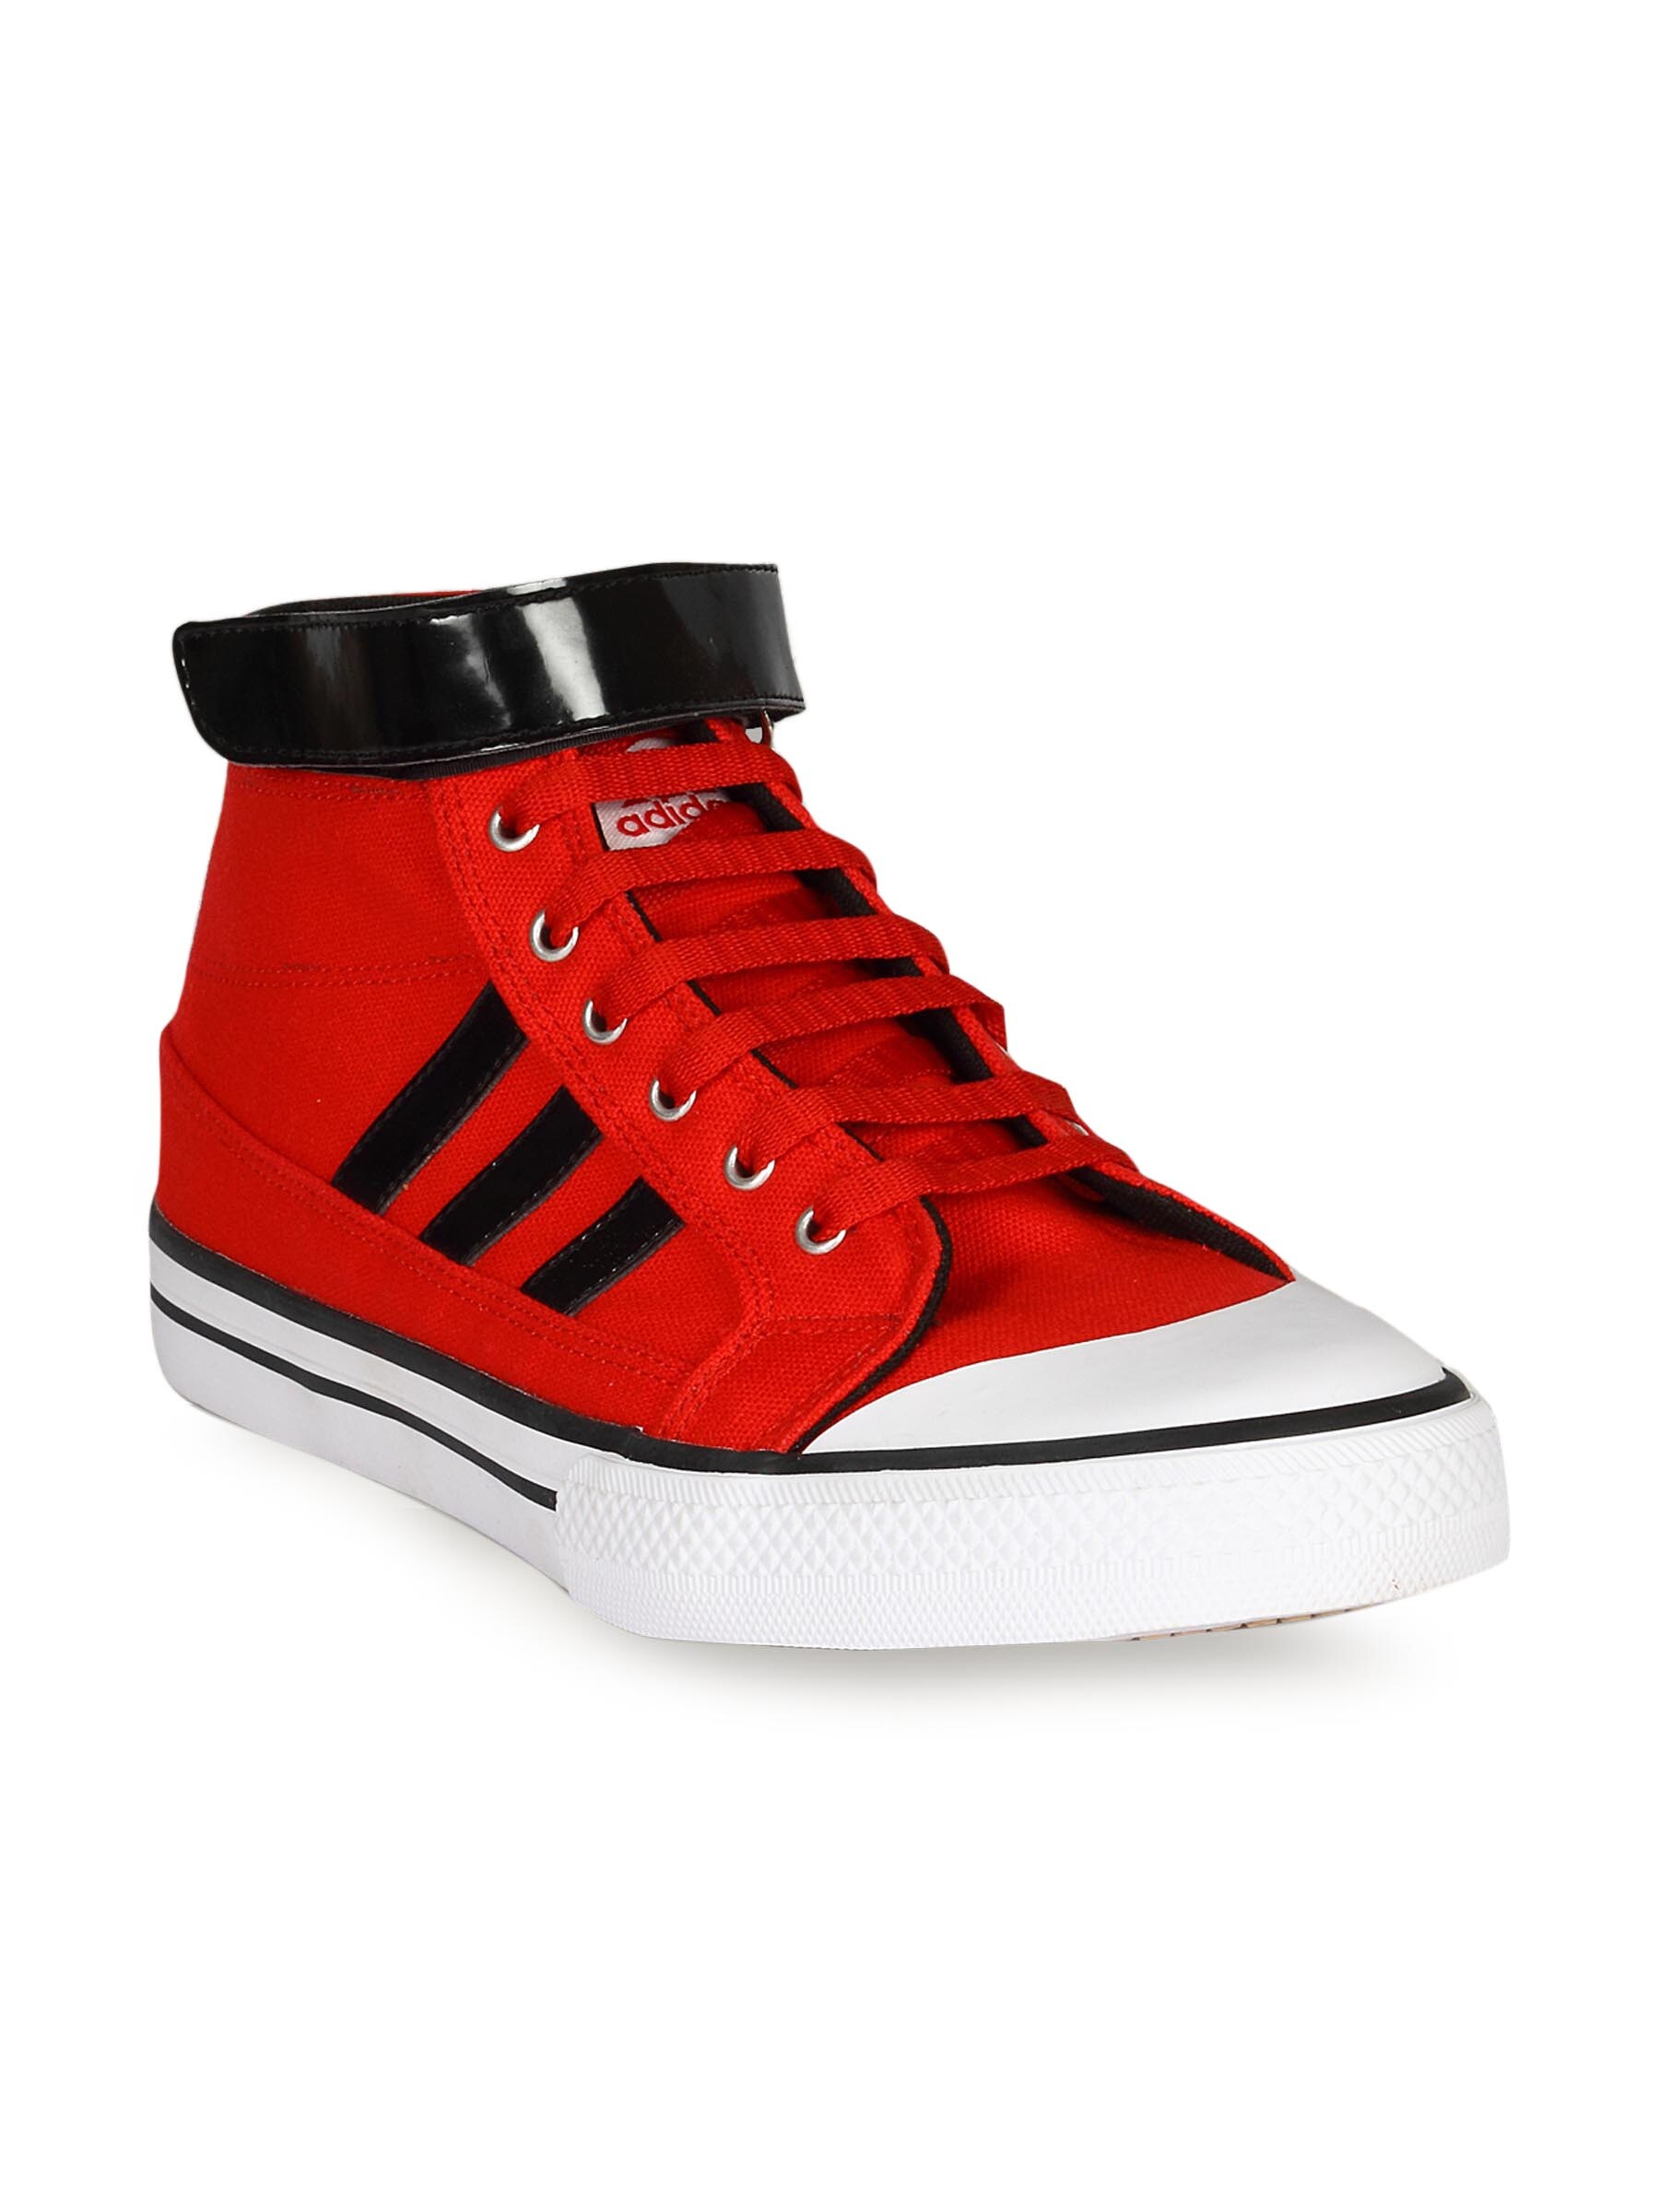 ADIDAS Unisex High Can Red Black Shoe